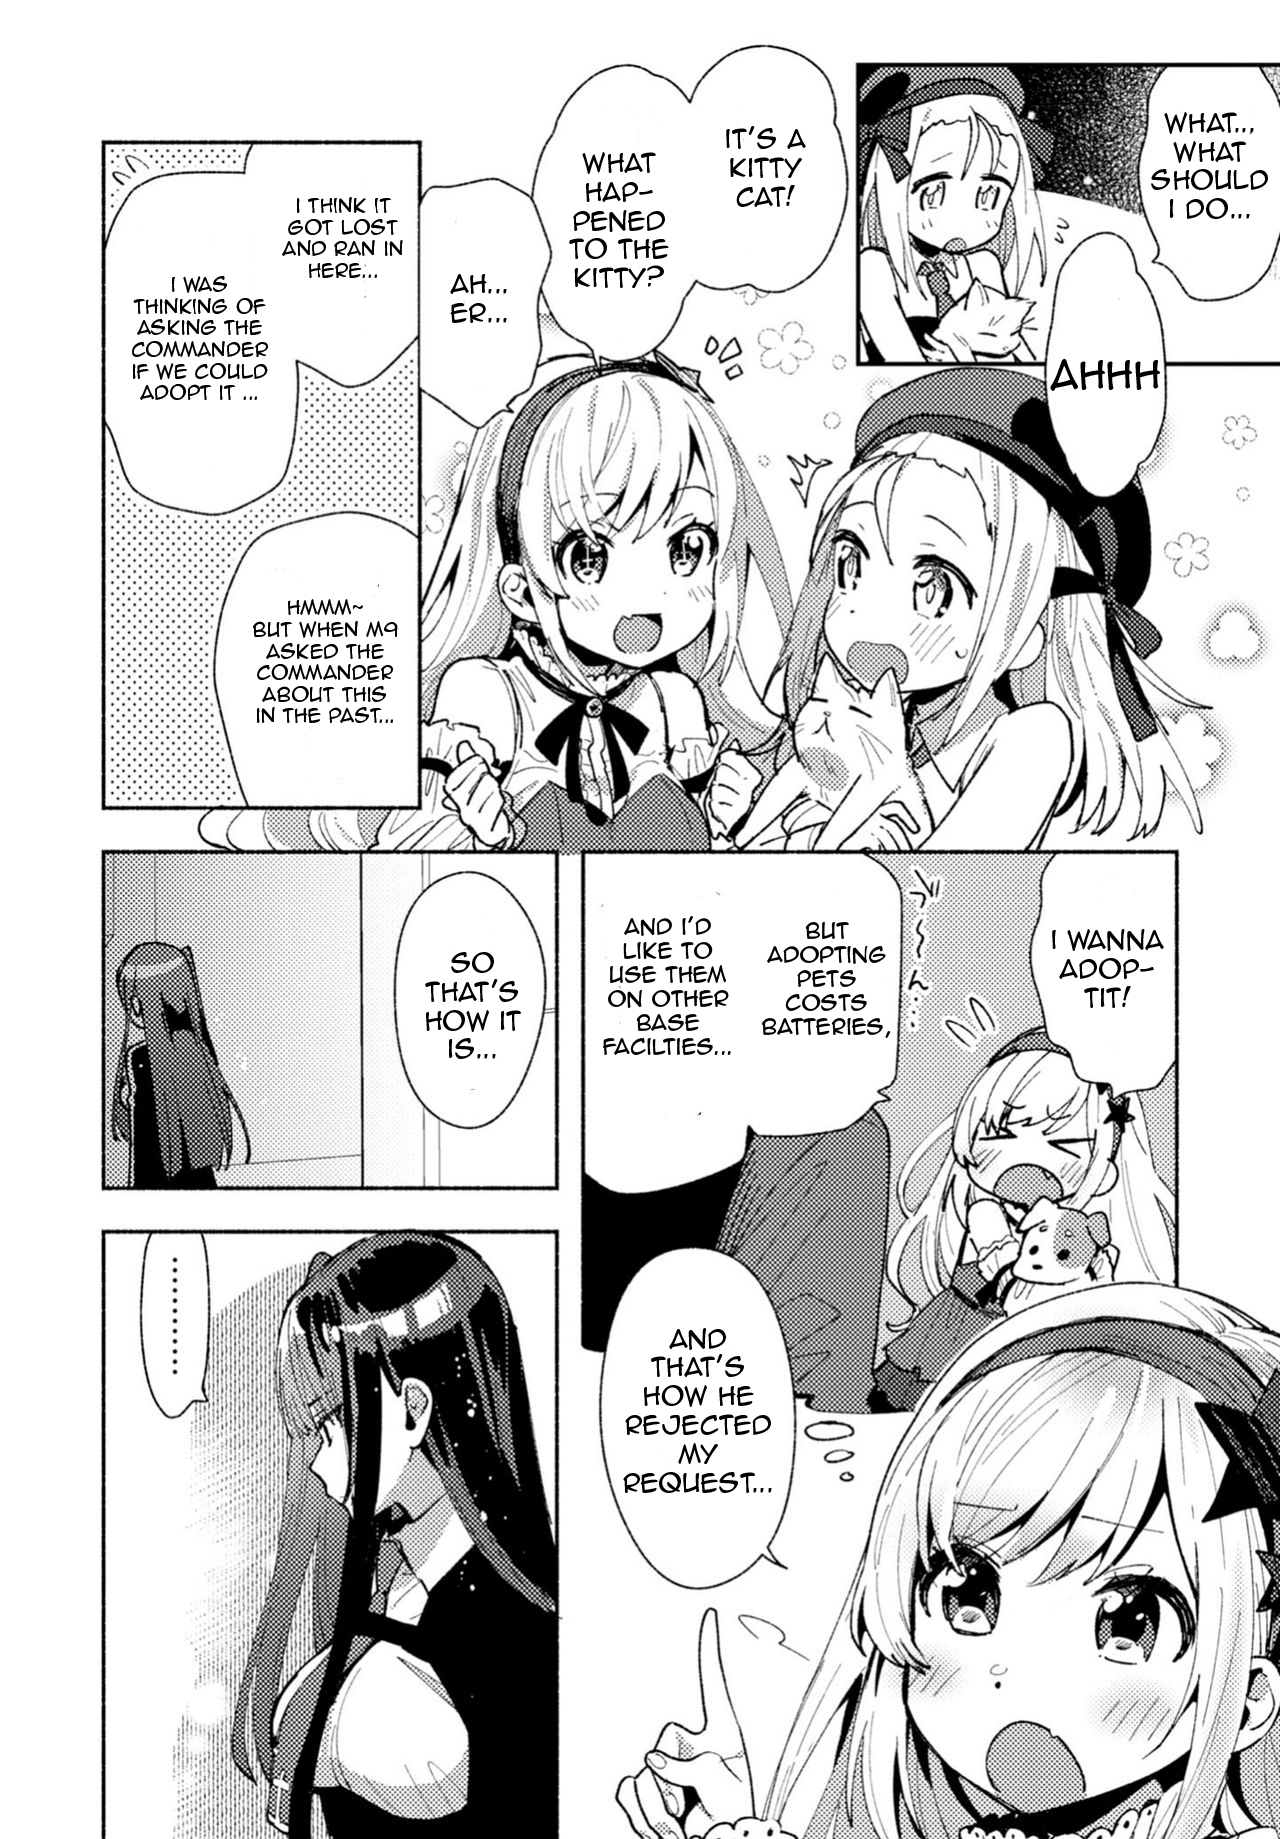 Dolls Frontline Comic anthology Vol. 1 Ch. 13 Finding A Stray Pet